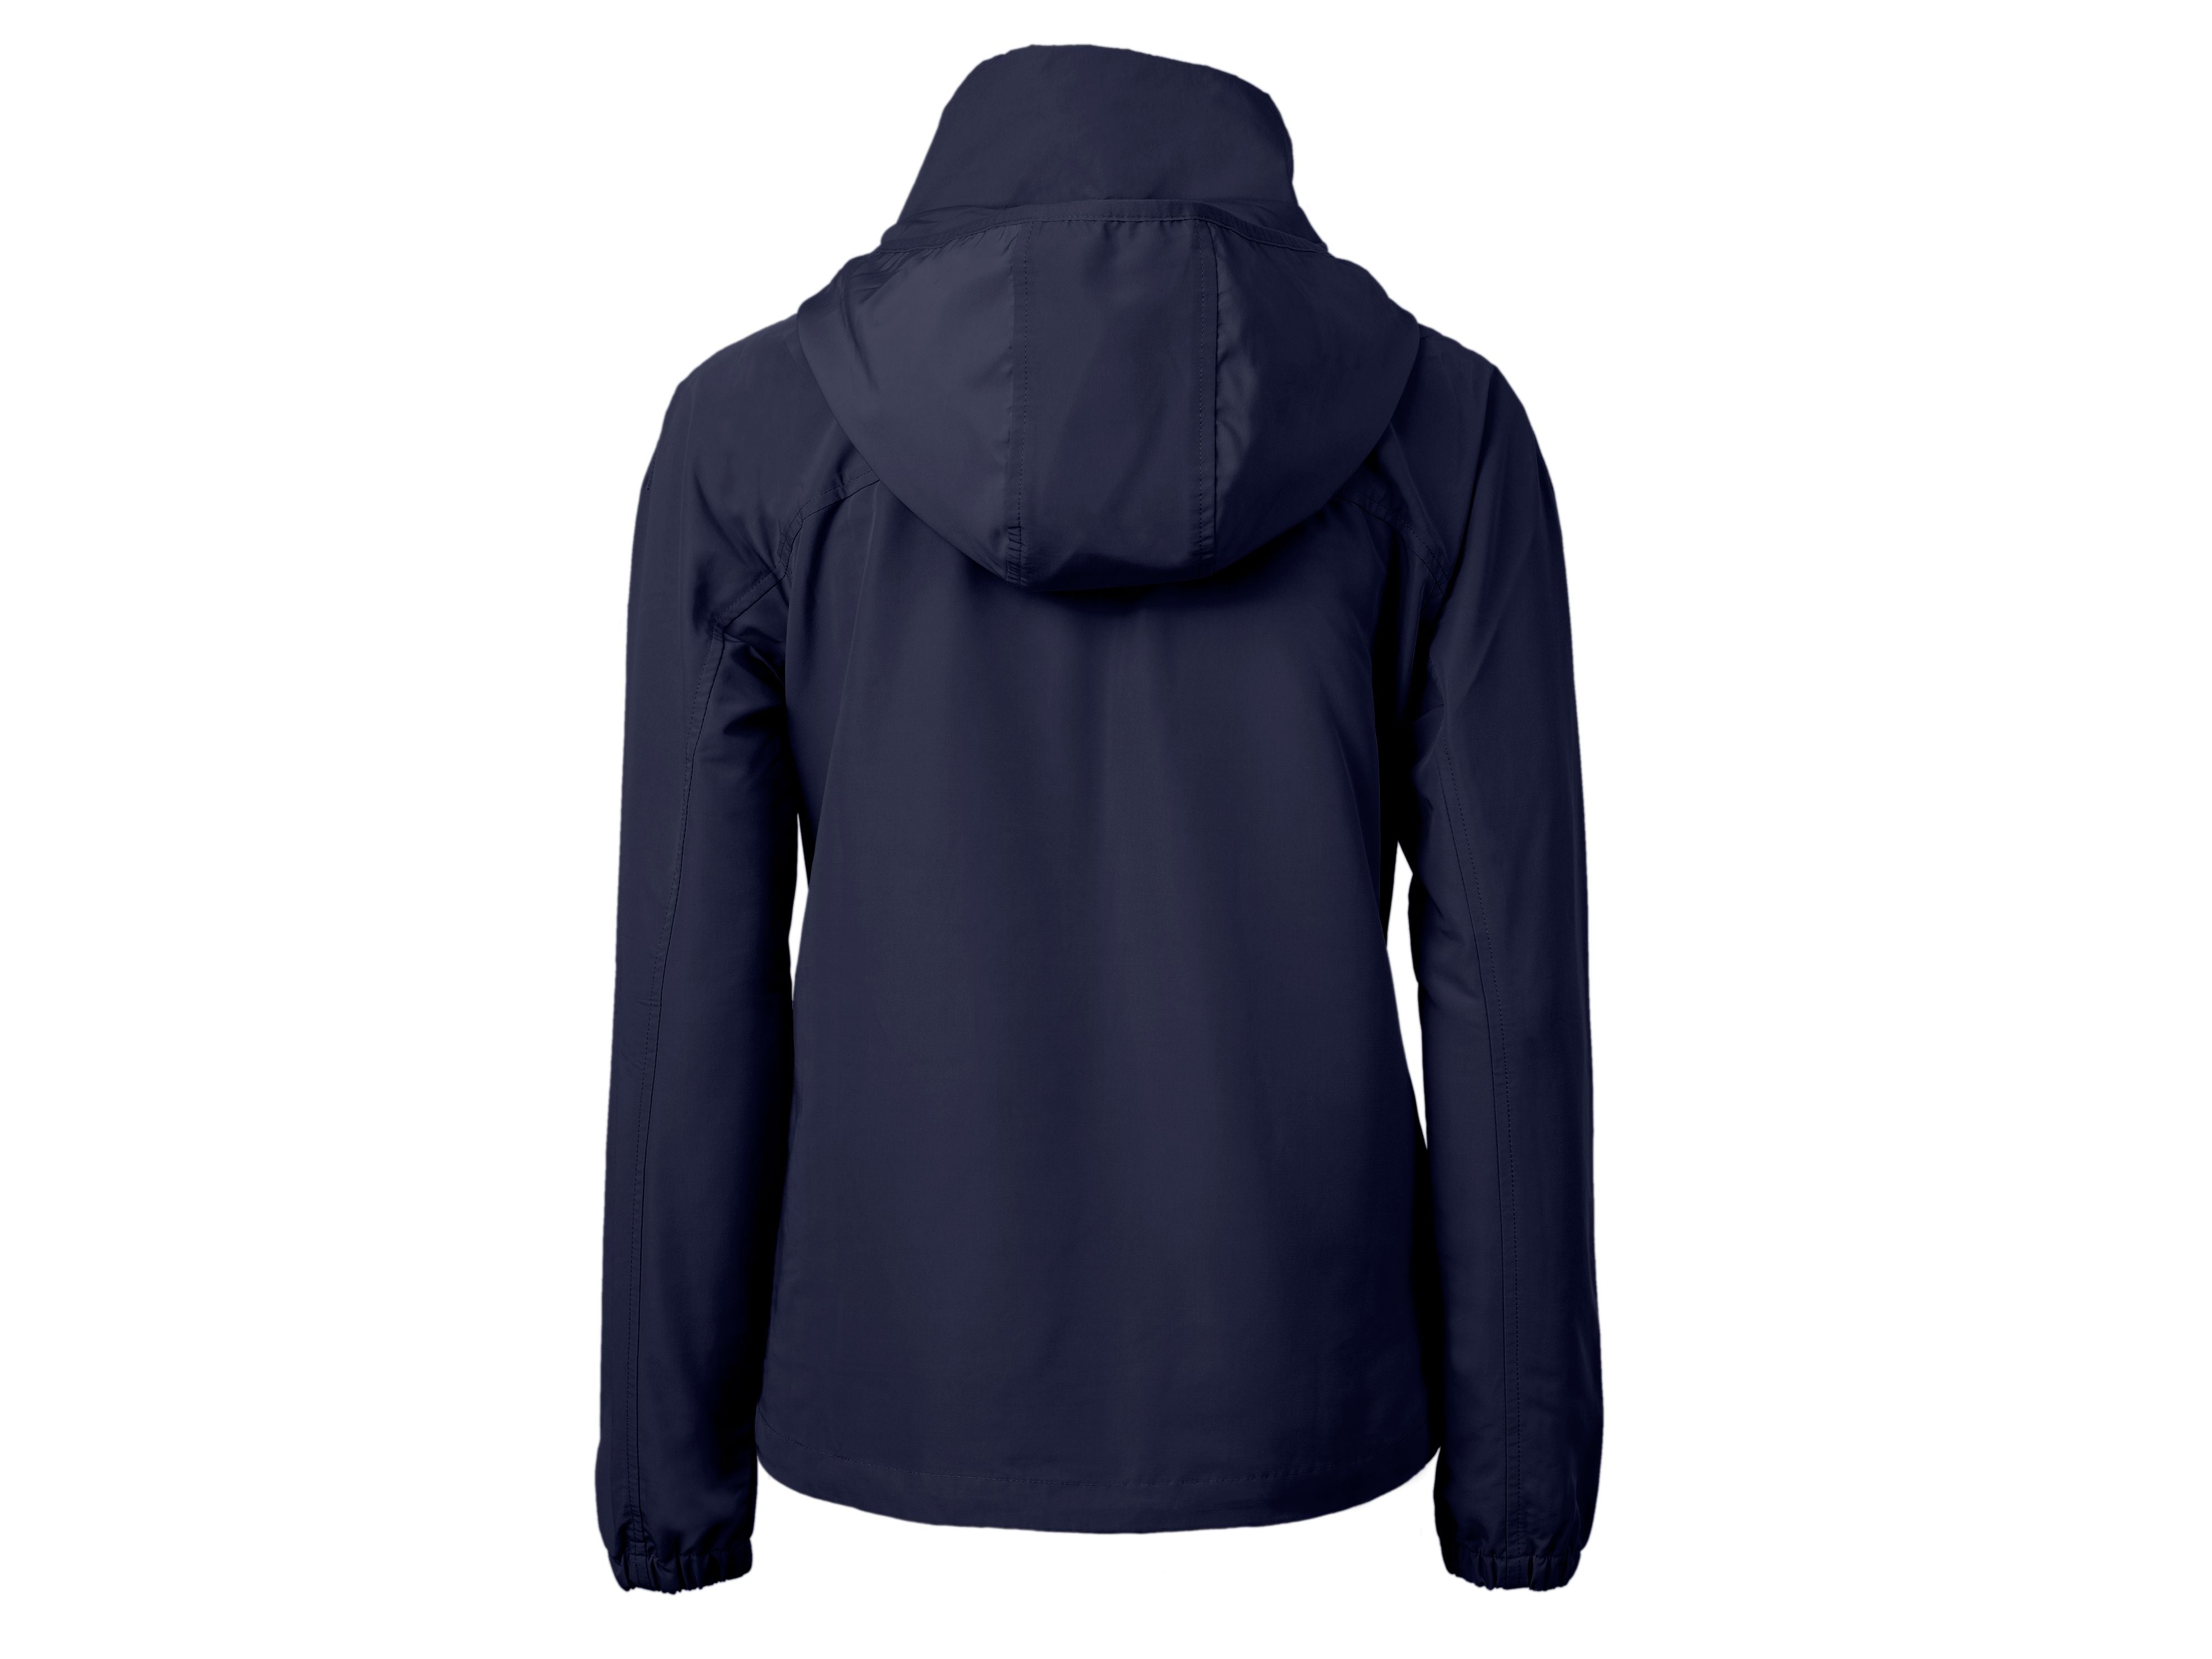 Cutter & Buck Charter Eco Recycled Women's Anorak Jacket